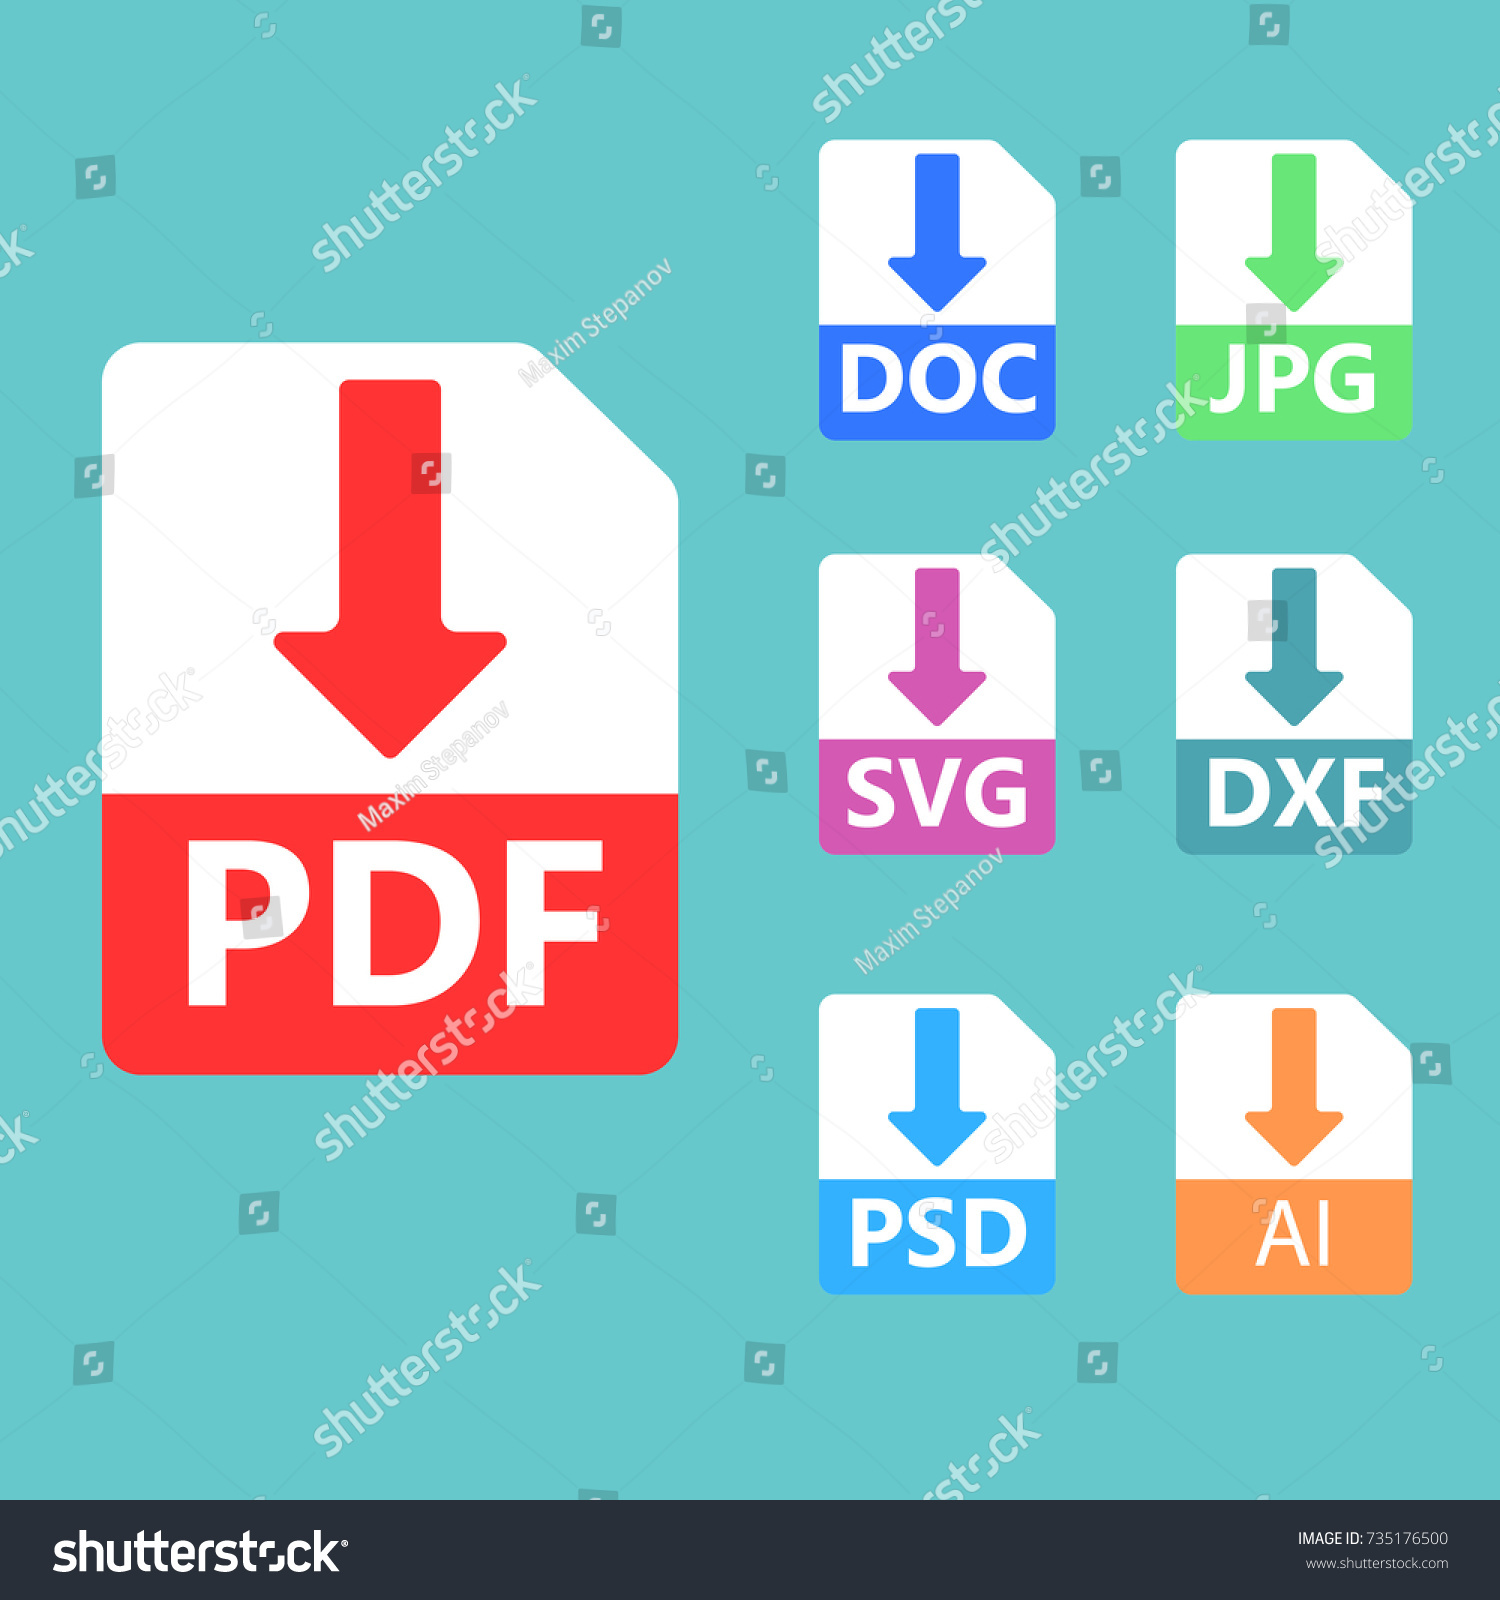 SVG of Collection of vector icons. Download signs. PDF, SVG, DOC, JPG PSD file formats svg